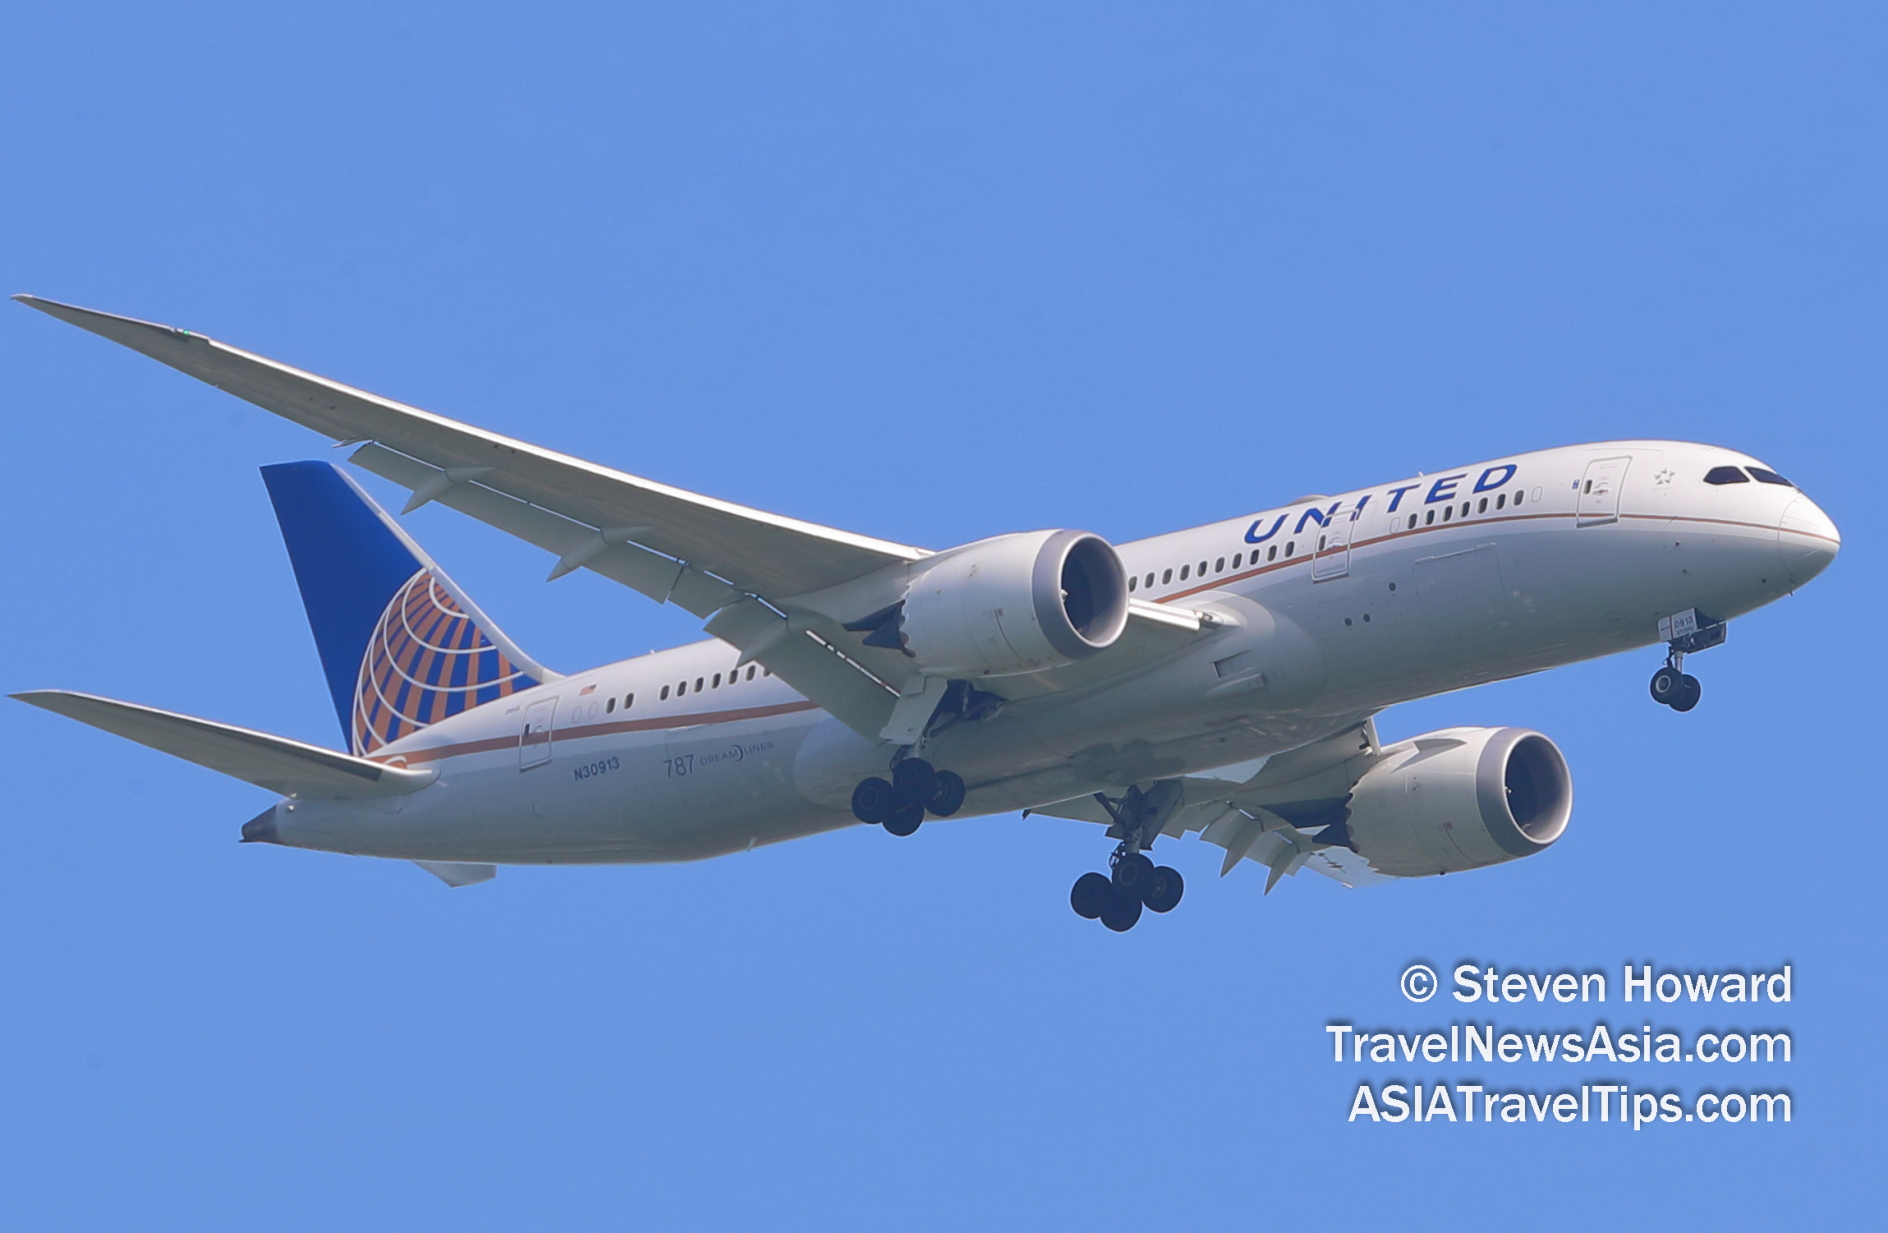 United Airlines Boeing 787-8 reg: N30913. Picture by Steven Howard of TravelNewsAsia.com Click to enlarge.